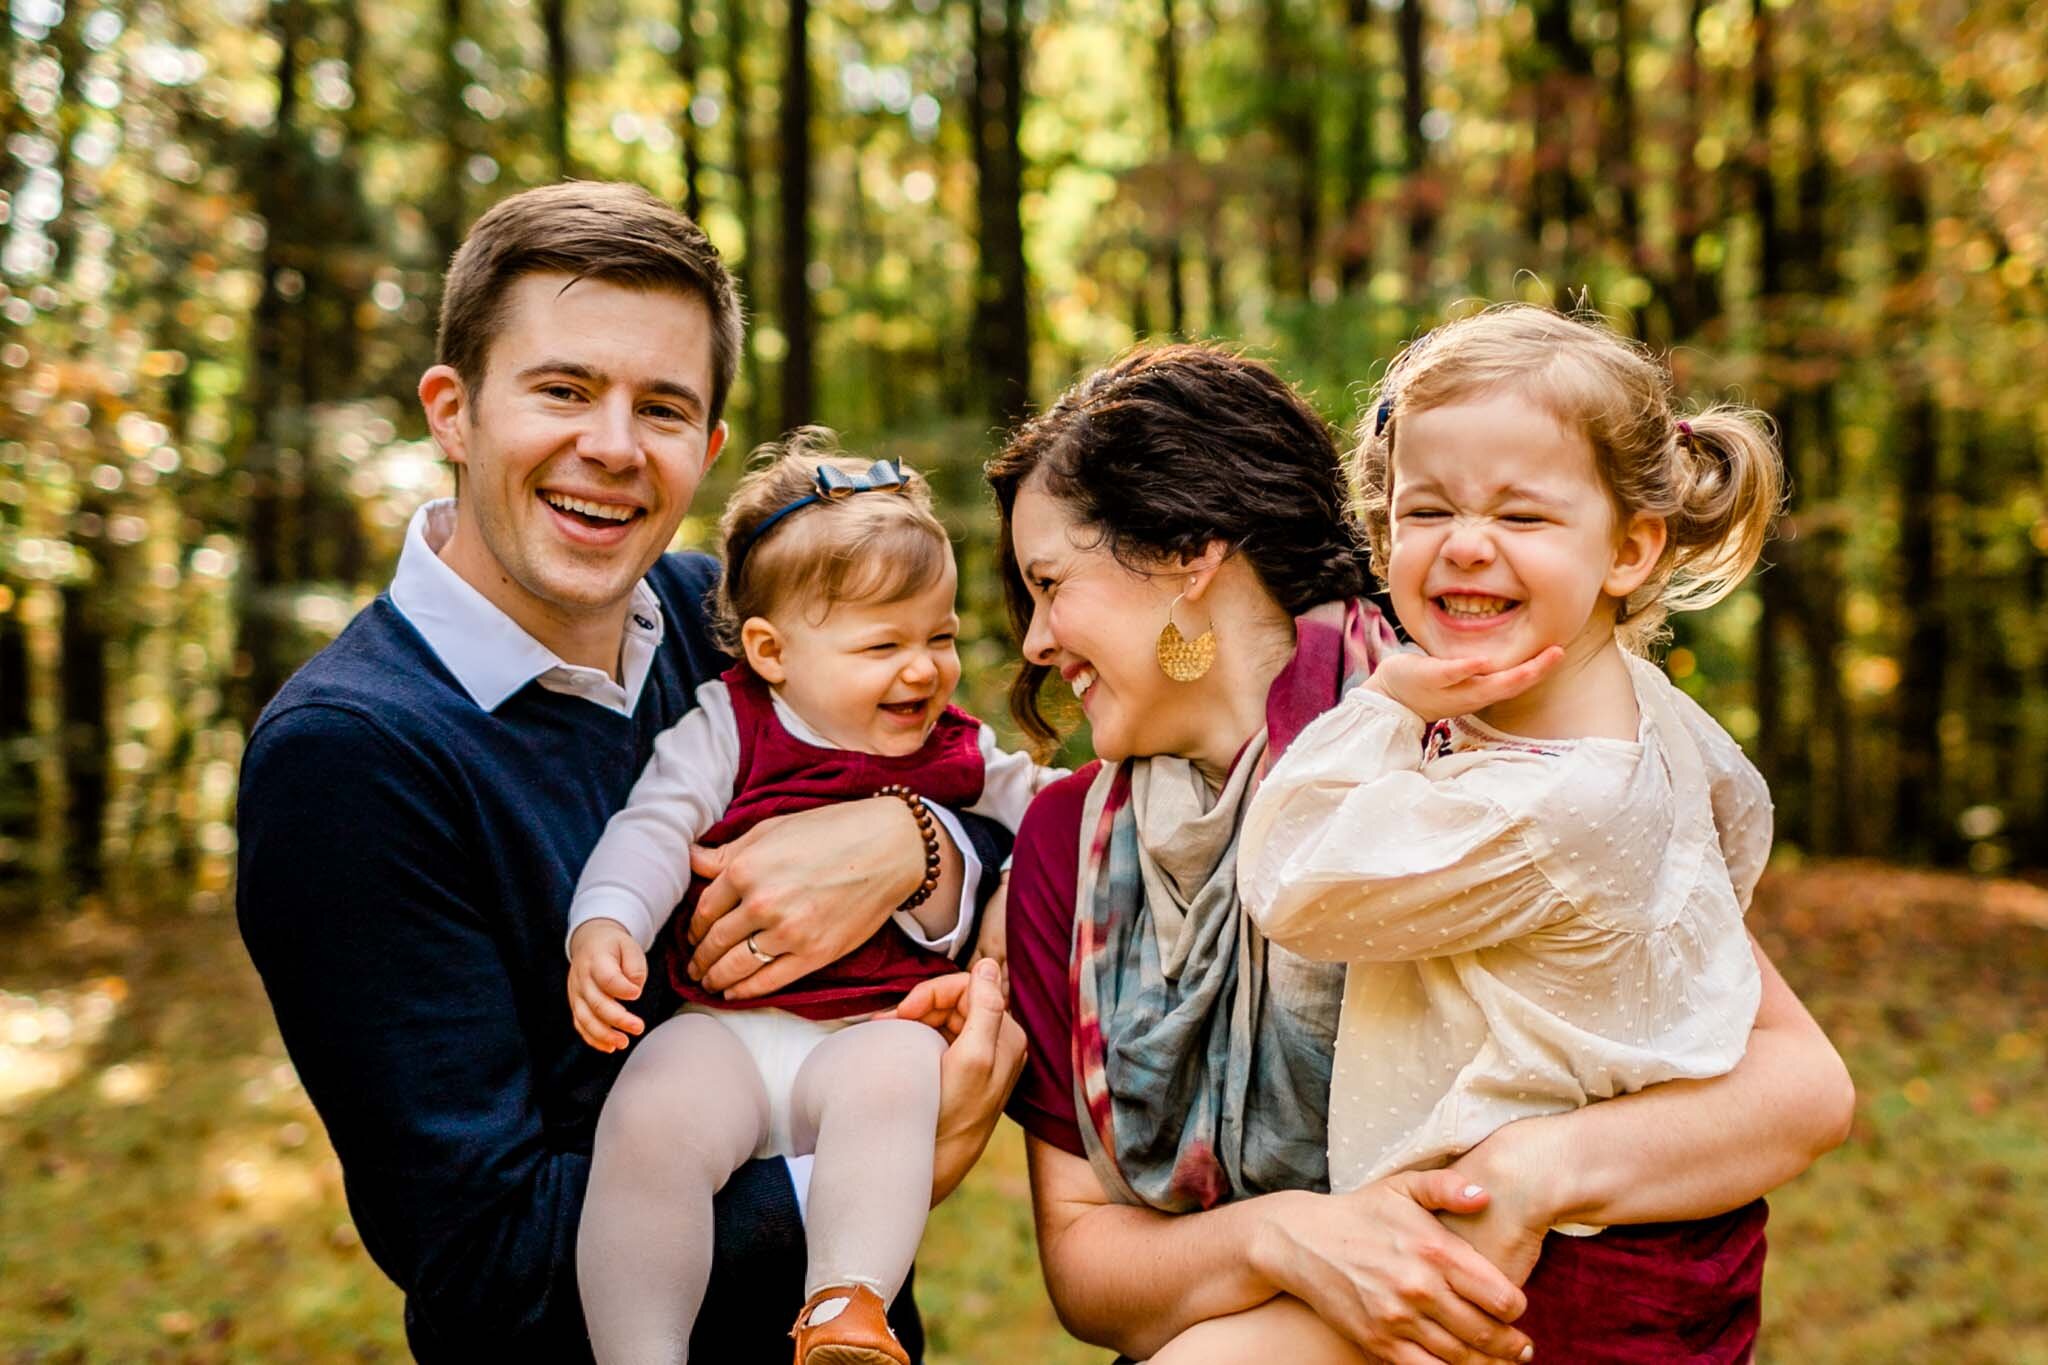 Raleigh Family Photographer | By G. Lin Photography | Umstead Park | Parents holding children and smiling